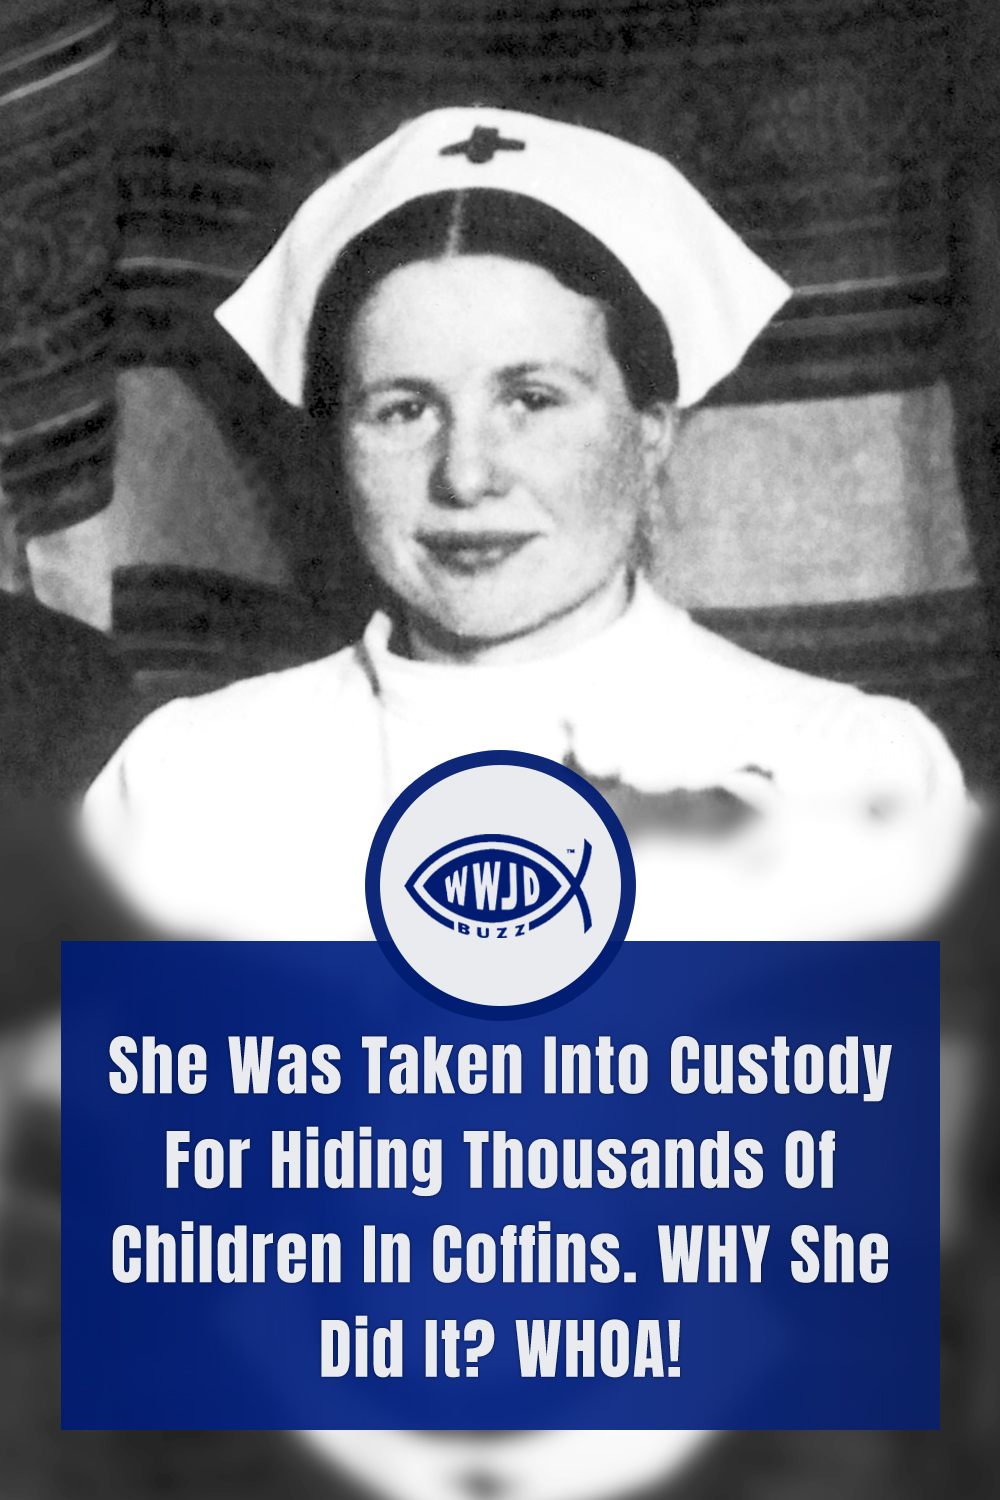 She Was Taken Into Custody For Hiding Thousands Of Children In Coffins. WHY She Did It? WHOA!